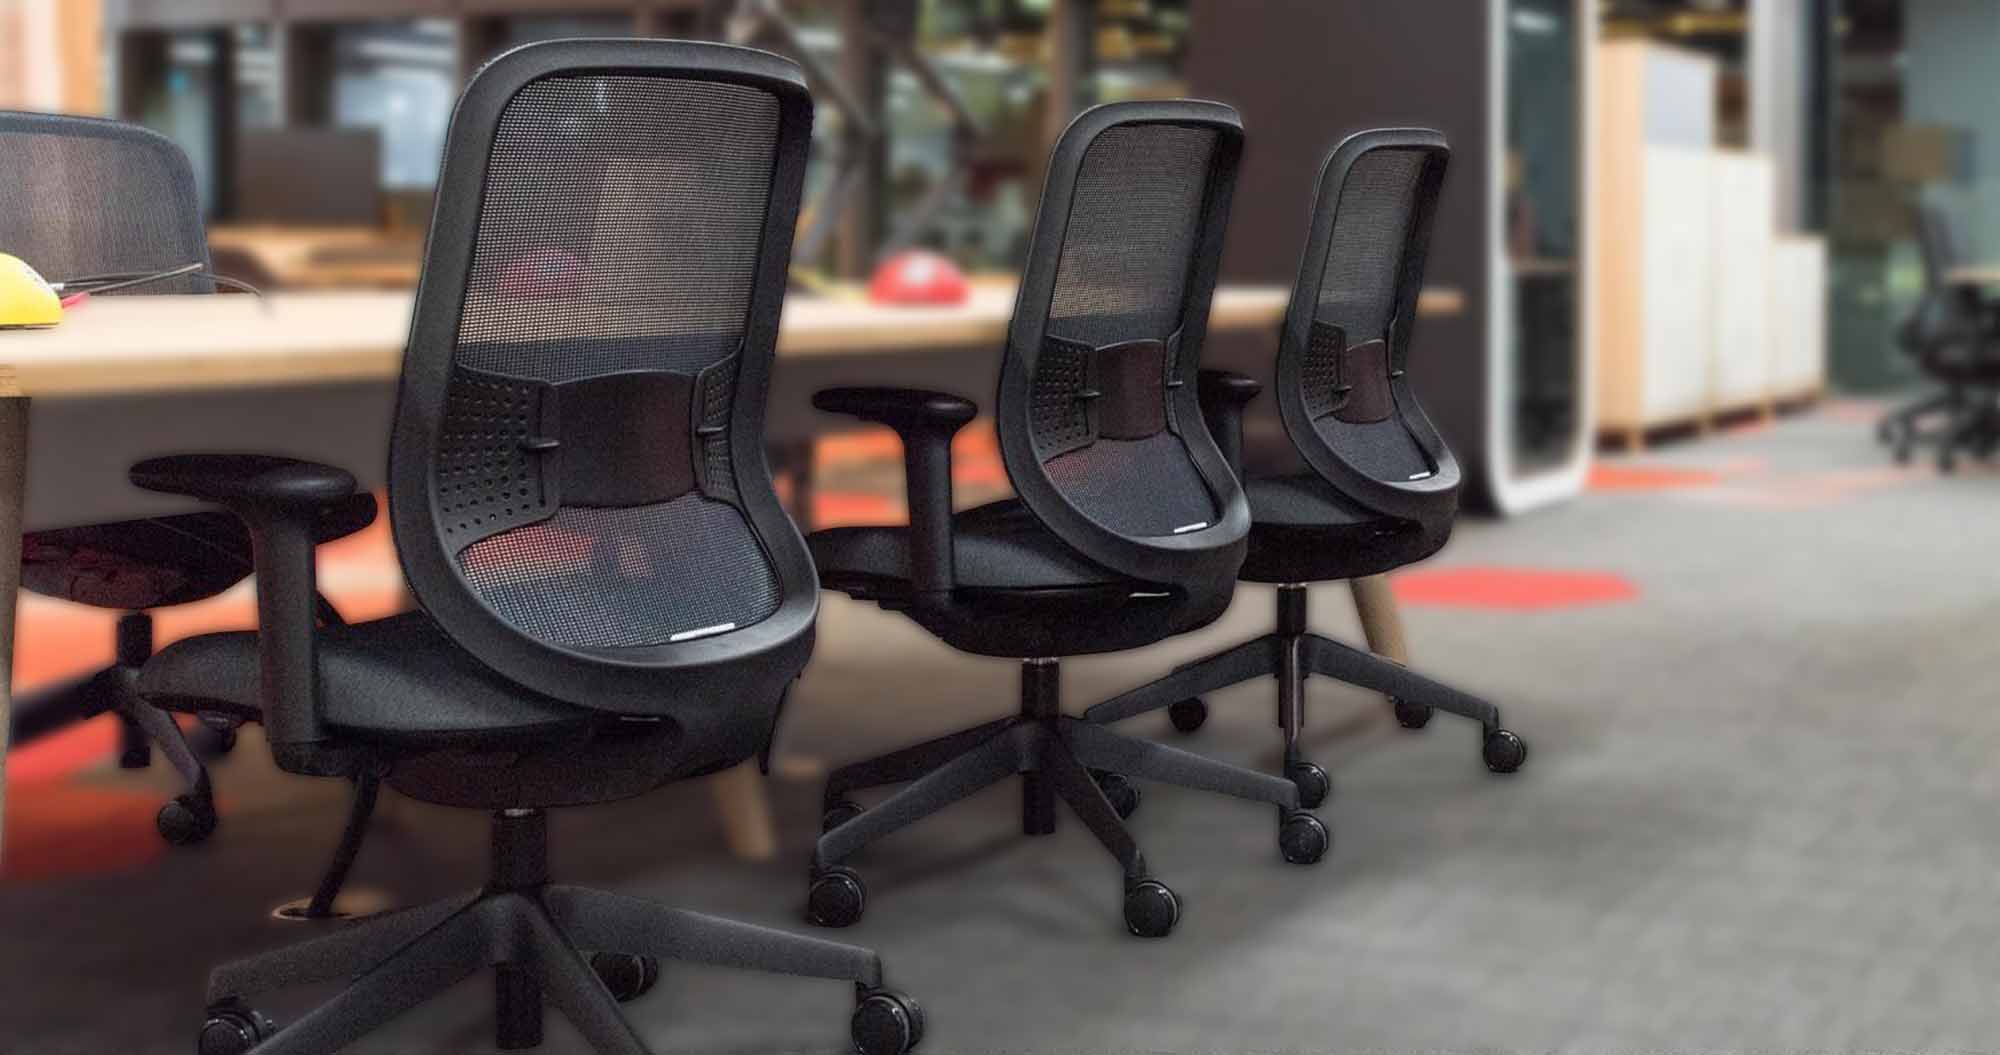 The Perfect Orangebox Chair for your Office